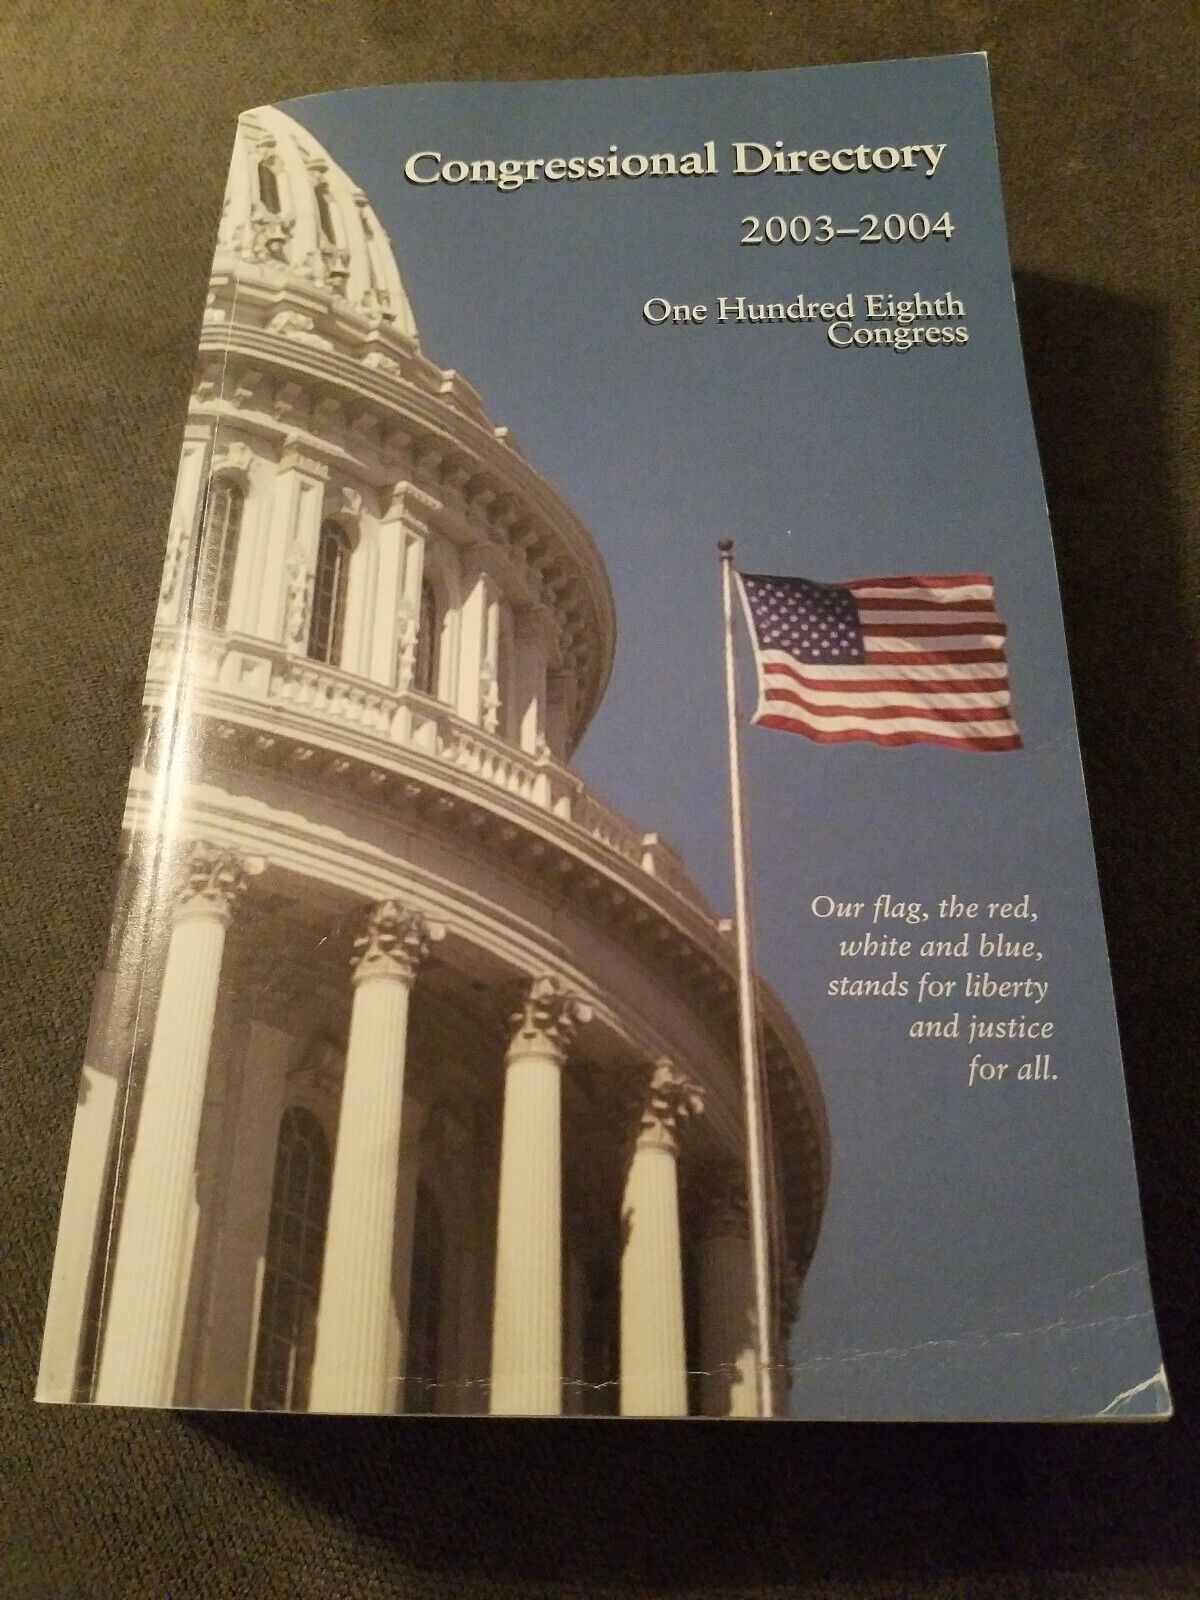 Congressional Directory 108th Congress 2003-2004